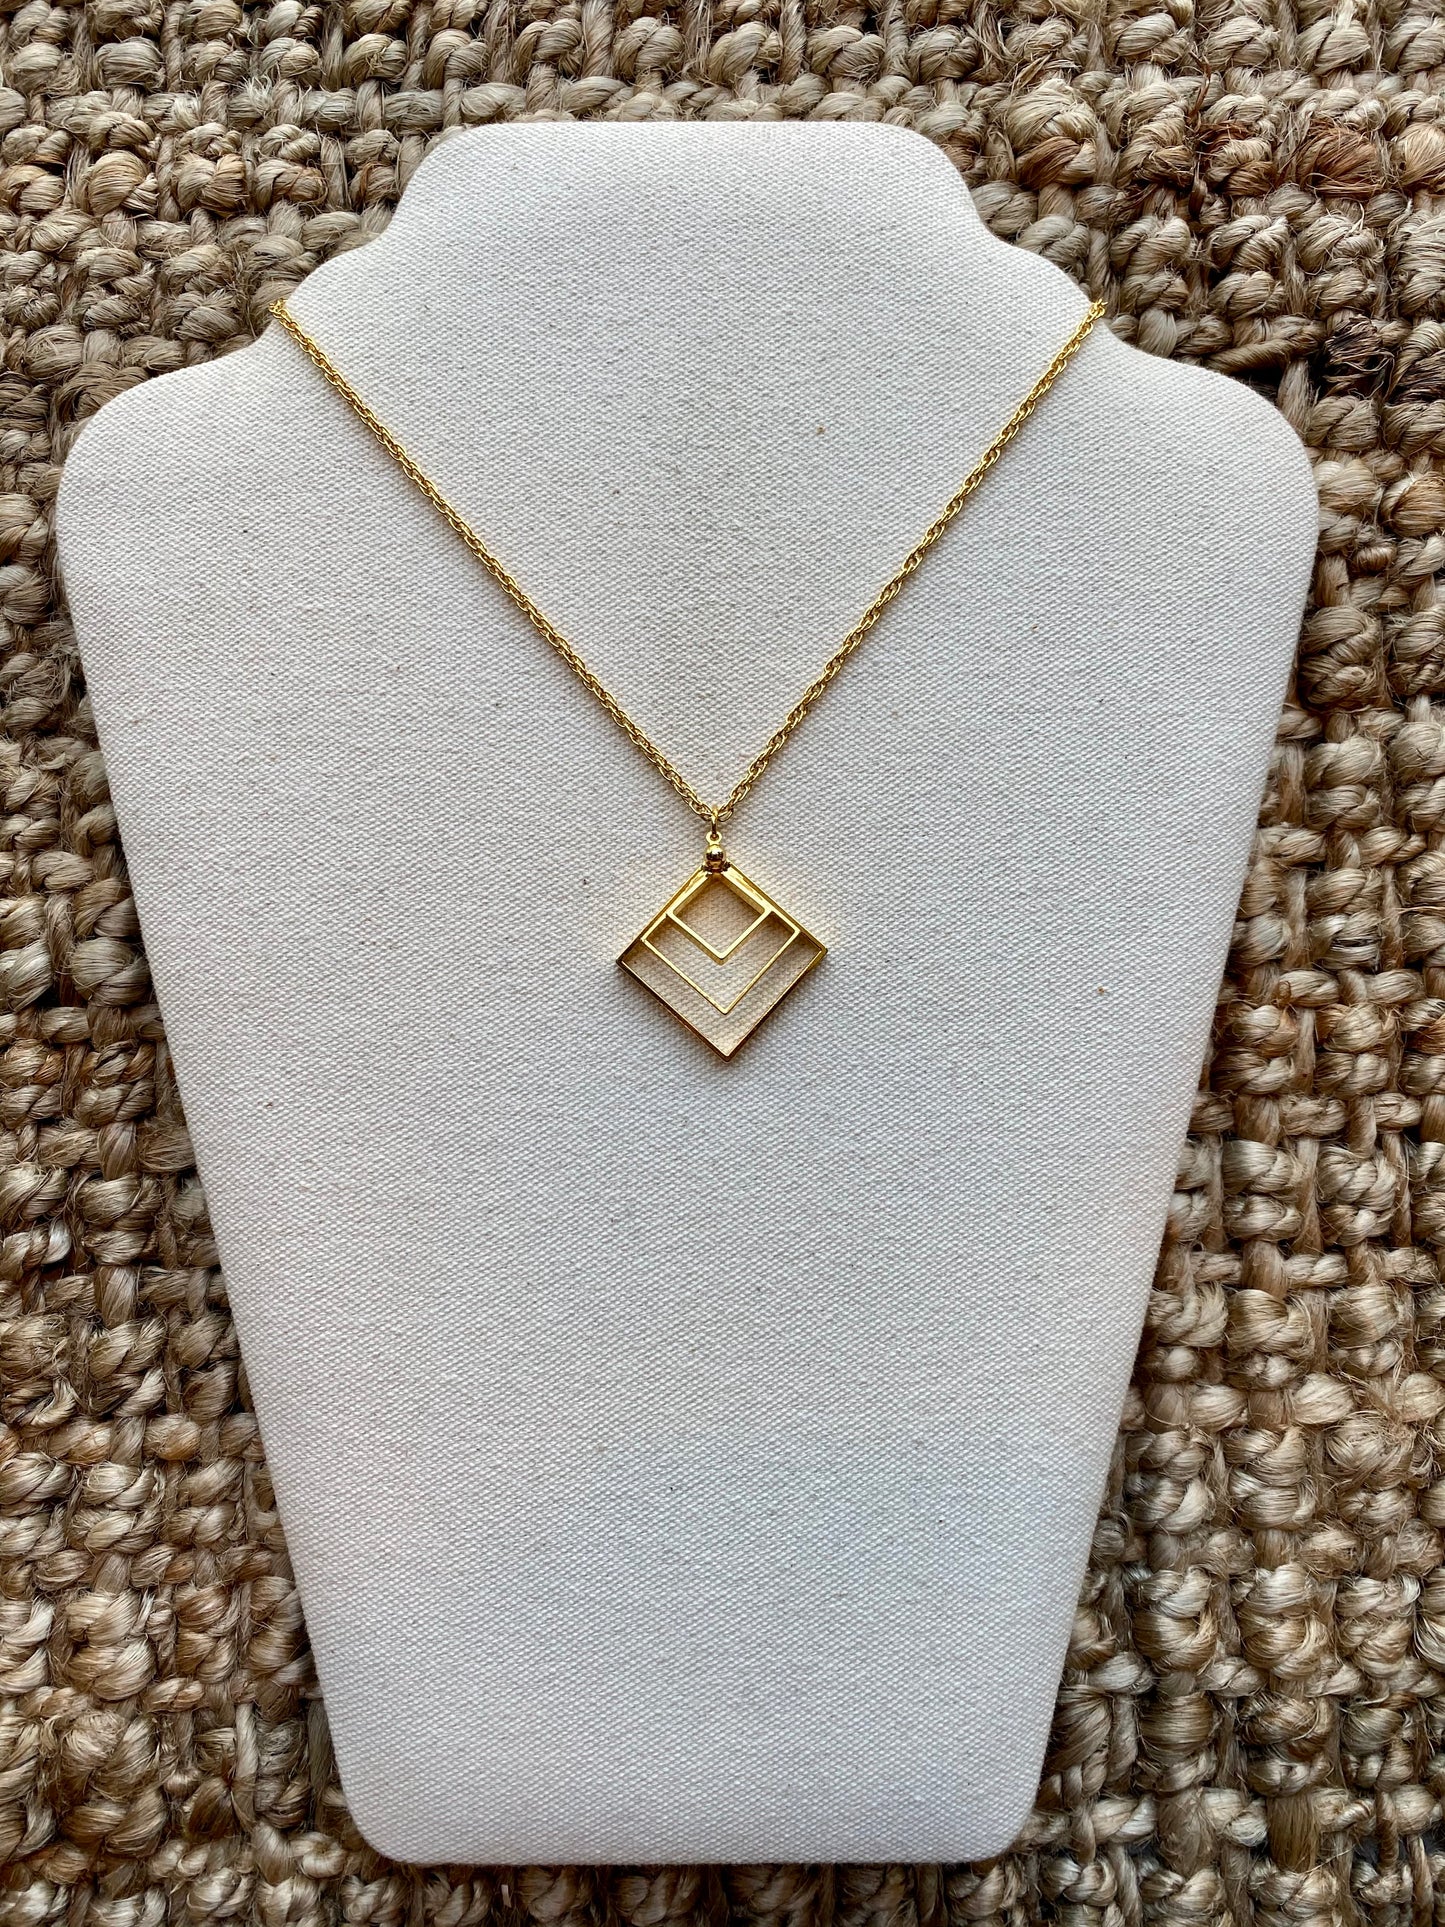 Three Dimensional Triangle Necklace